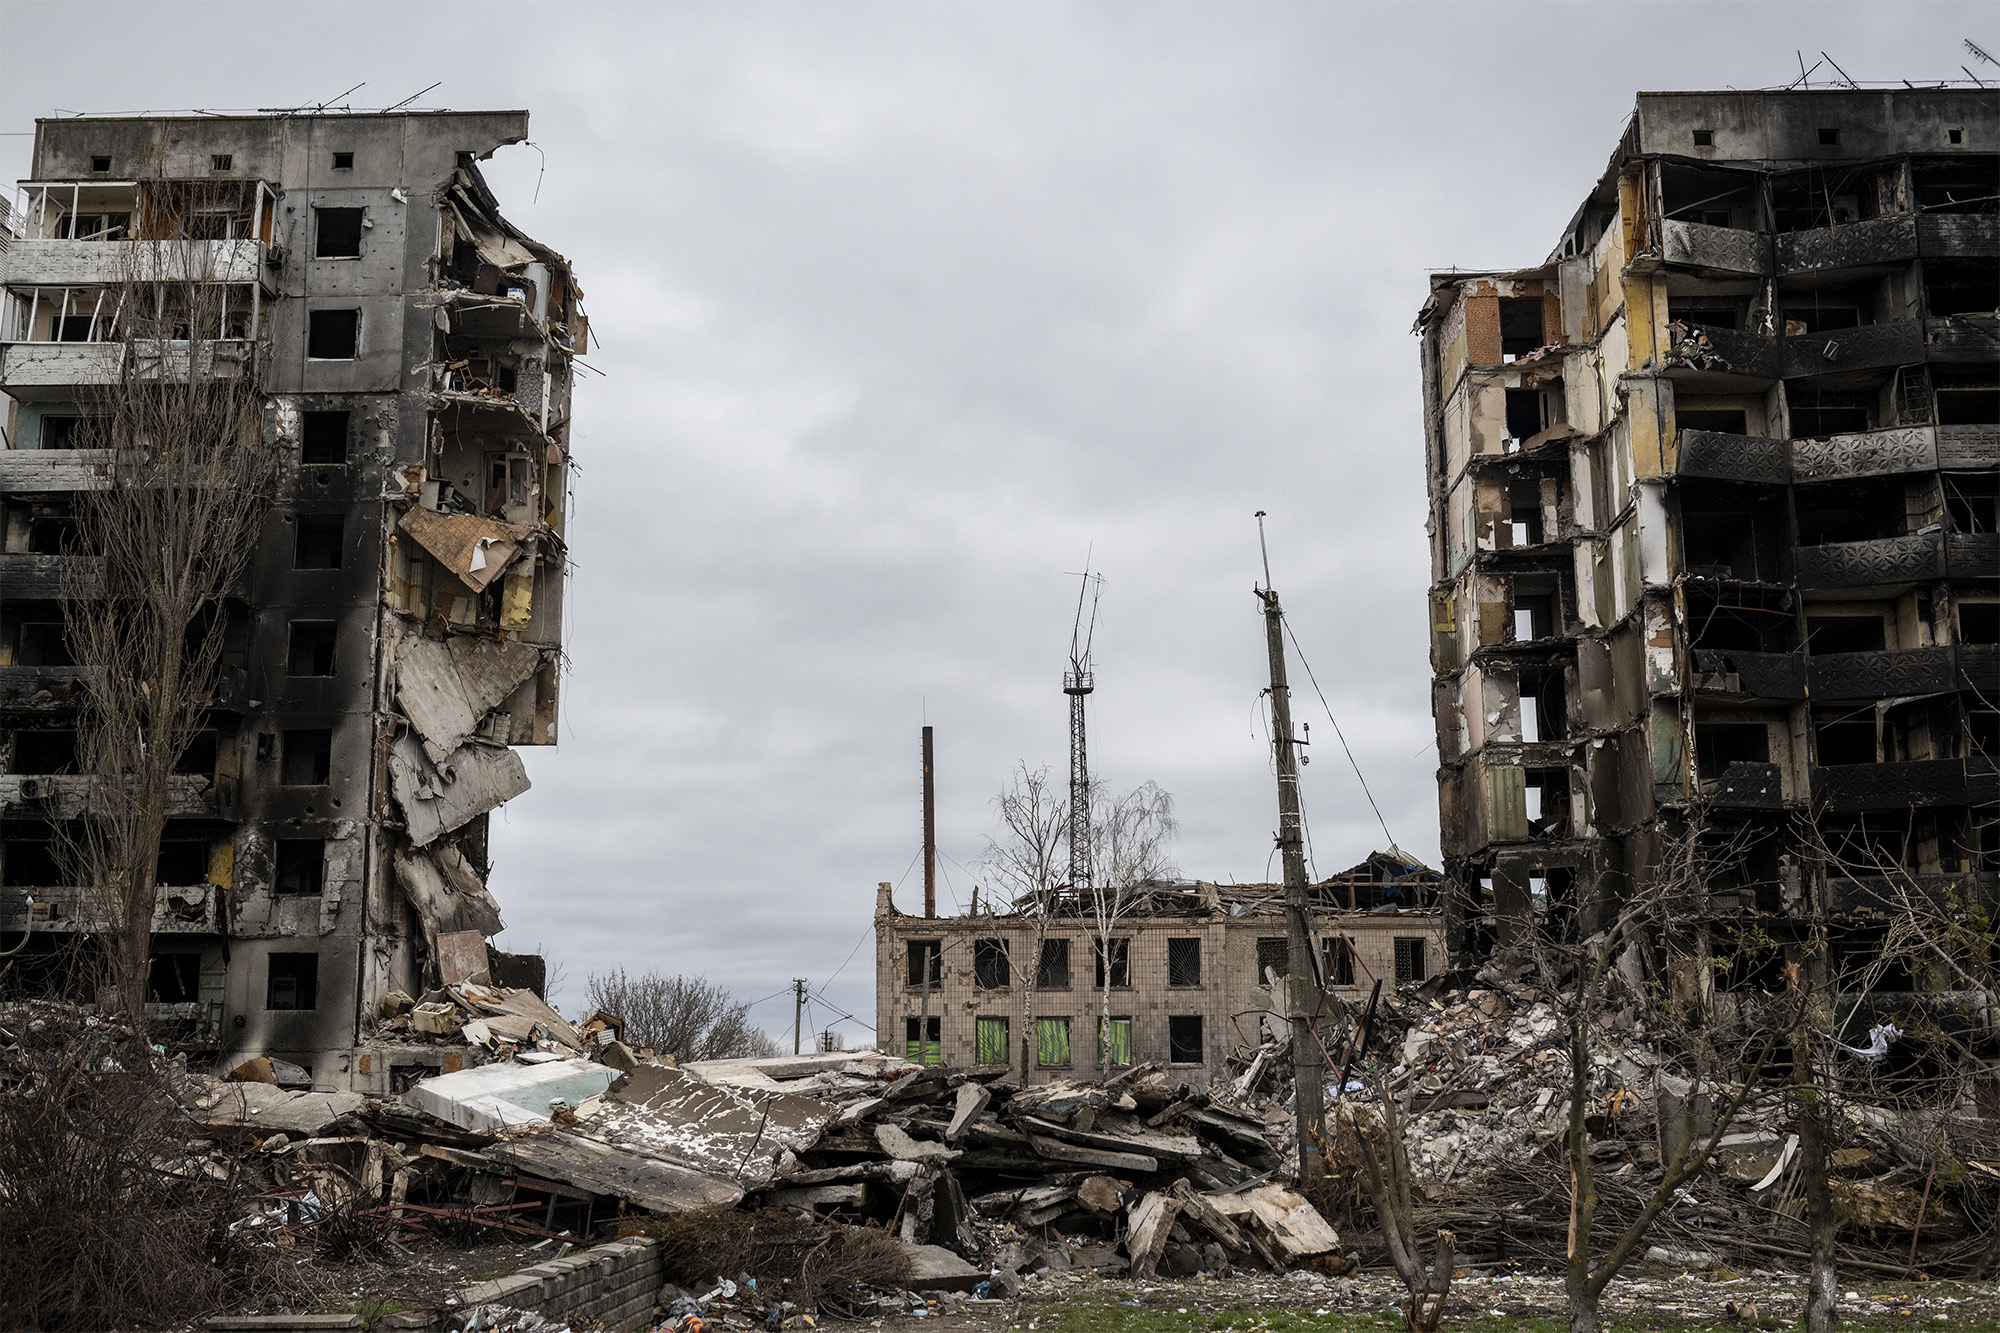 At the latest MIT Starr Forum, a year after the start of Russia’s invasion of Ukraine, experts examined the domestic implications of the war in both countries.